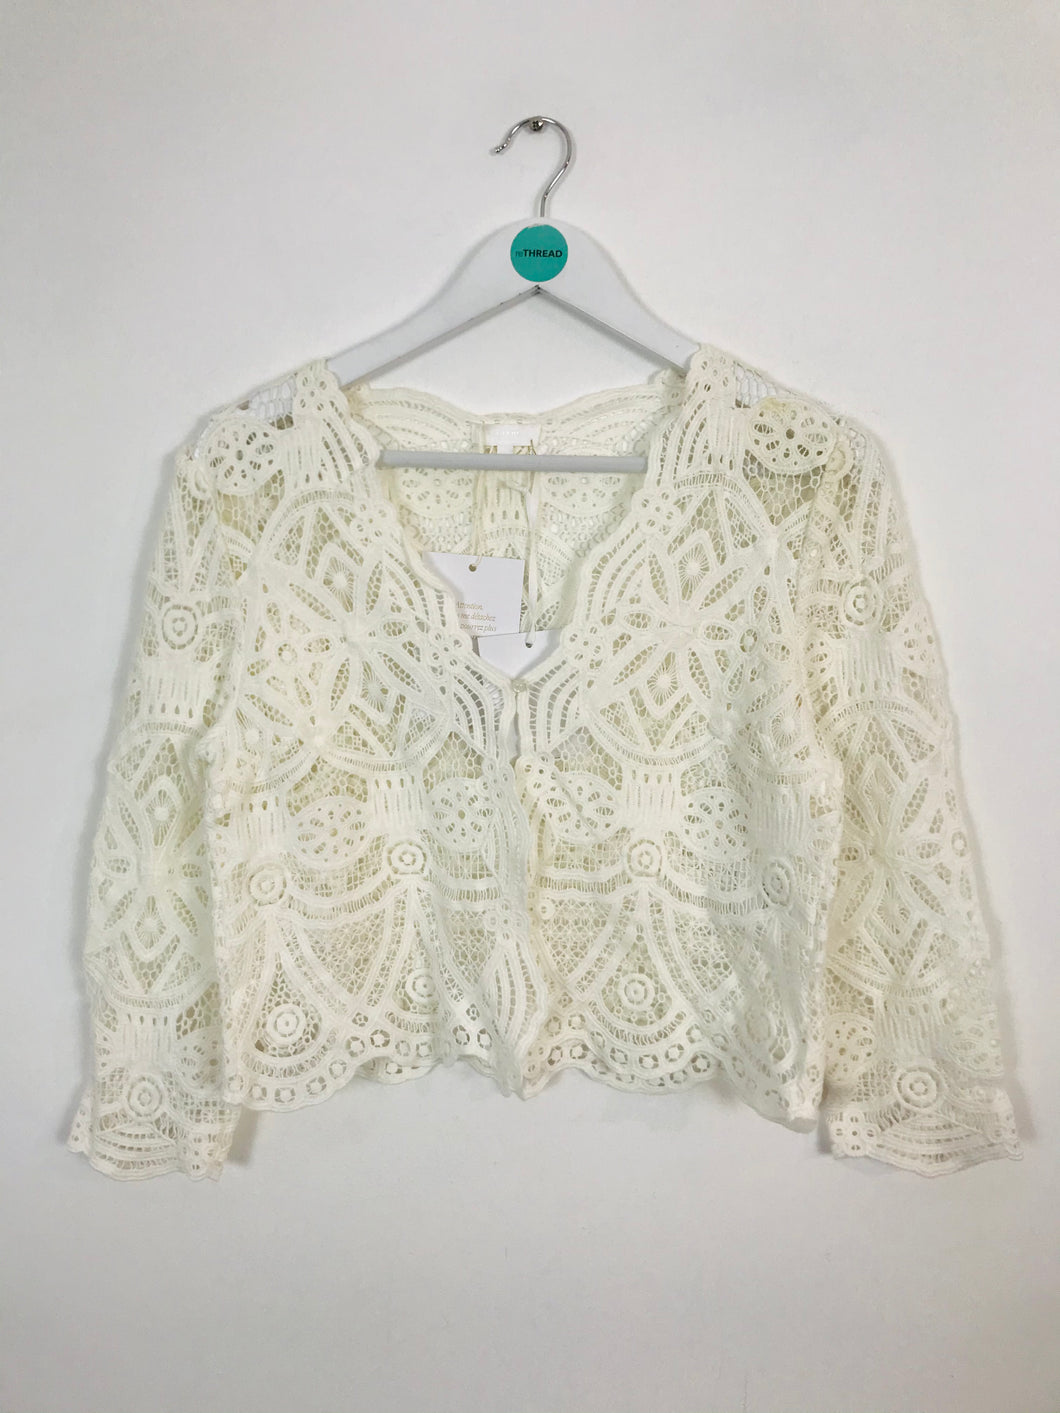 Sezane Women’s Cropped Lace Jacket Top With Tags | M UK10-12 | White